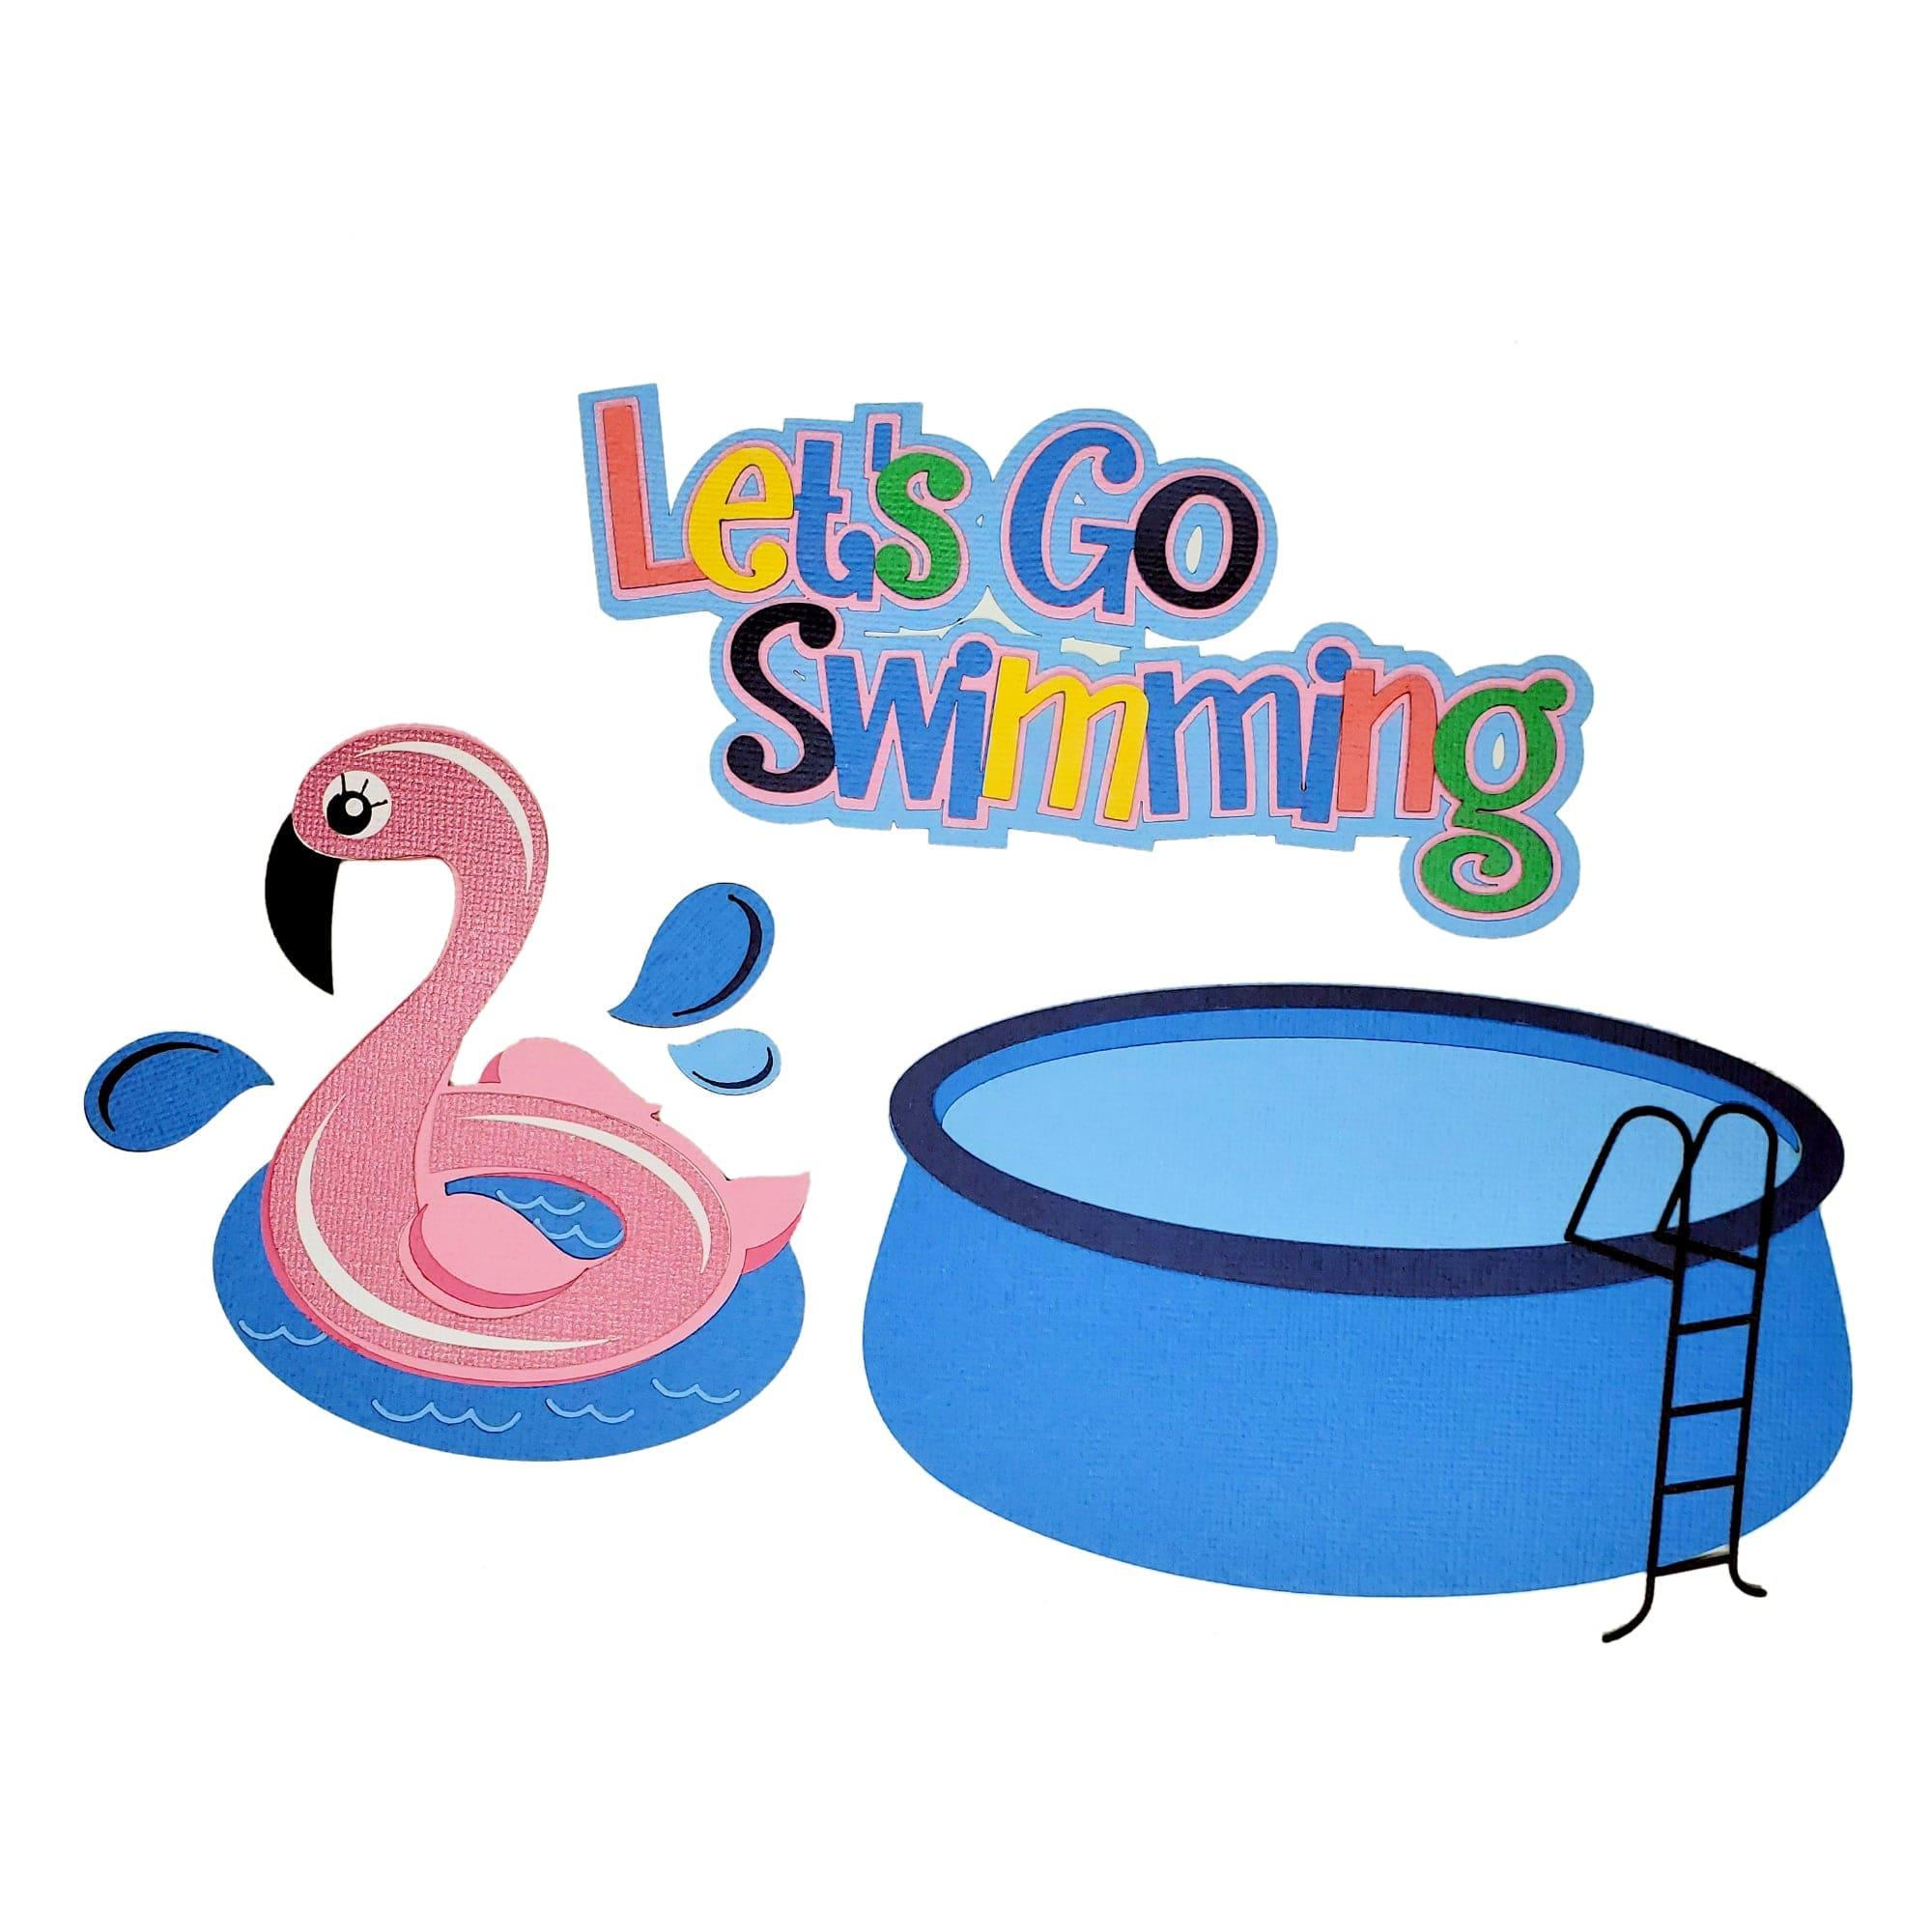 Let's Go Swimming 7" x 3" Title with Swimming Pool & Flamingo Pool Float Scrapbook Embellishment Set by SSC Laser Designs